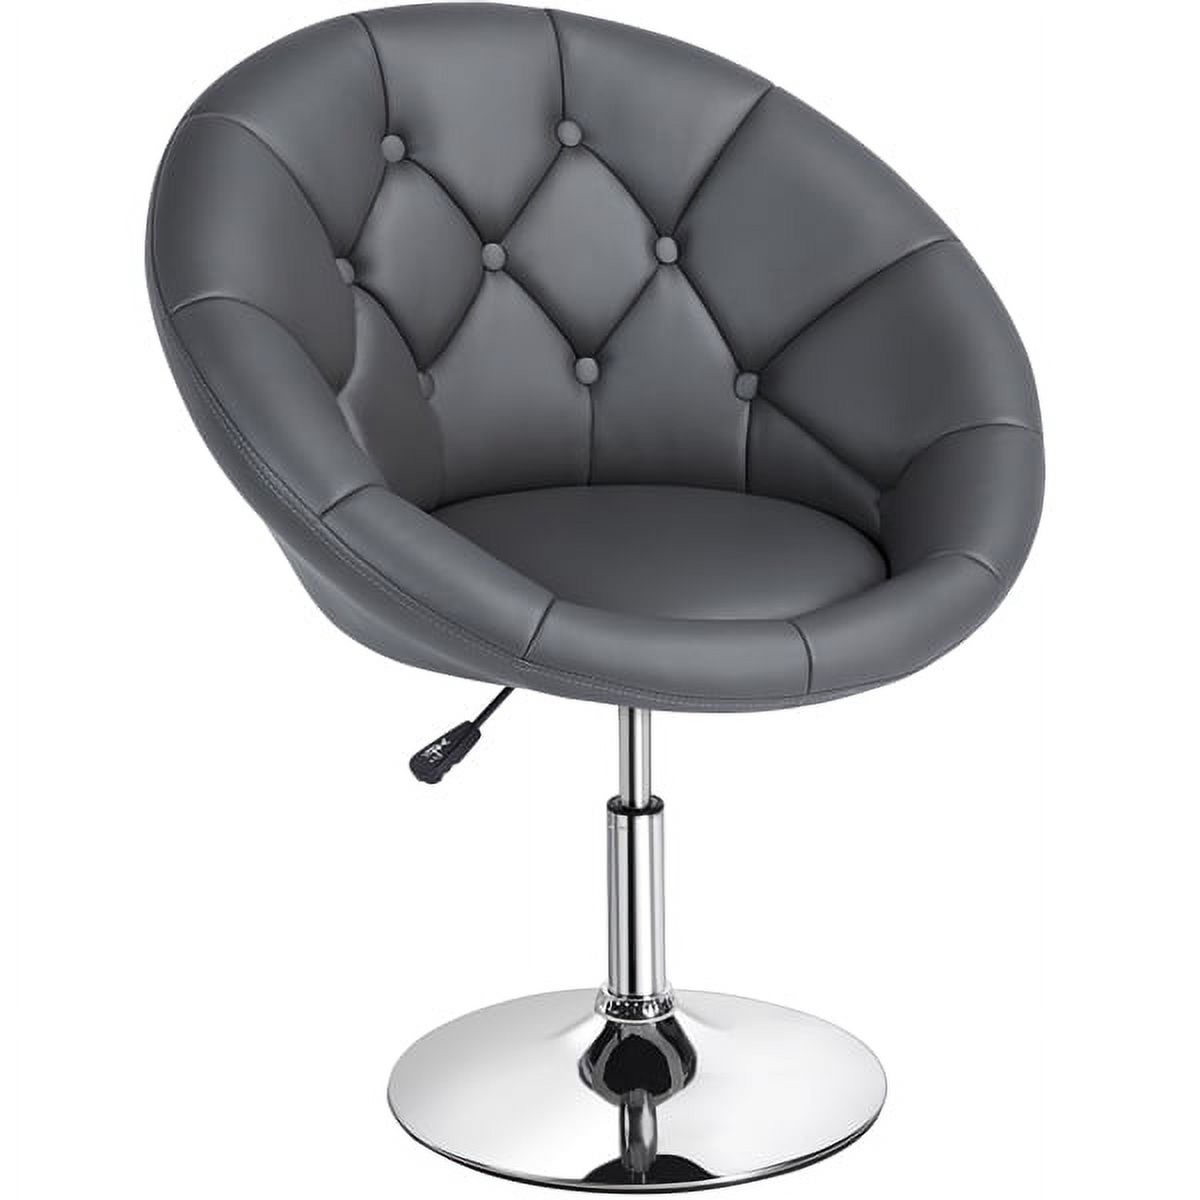 Alden Design Modern Tufted Adjustable Barrel Swivel Accent Chair, Gray Faux Leather - image 2 of 13